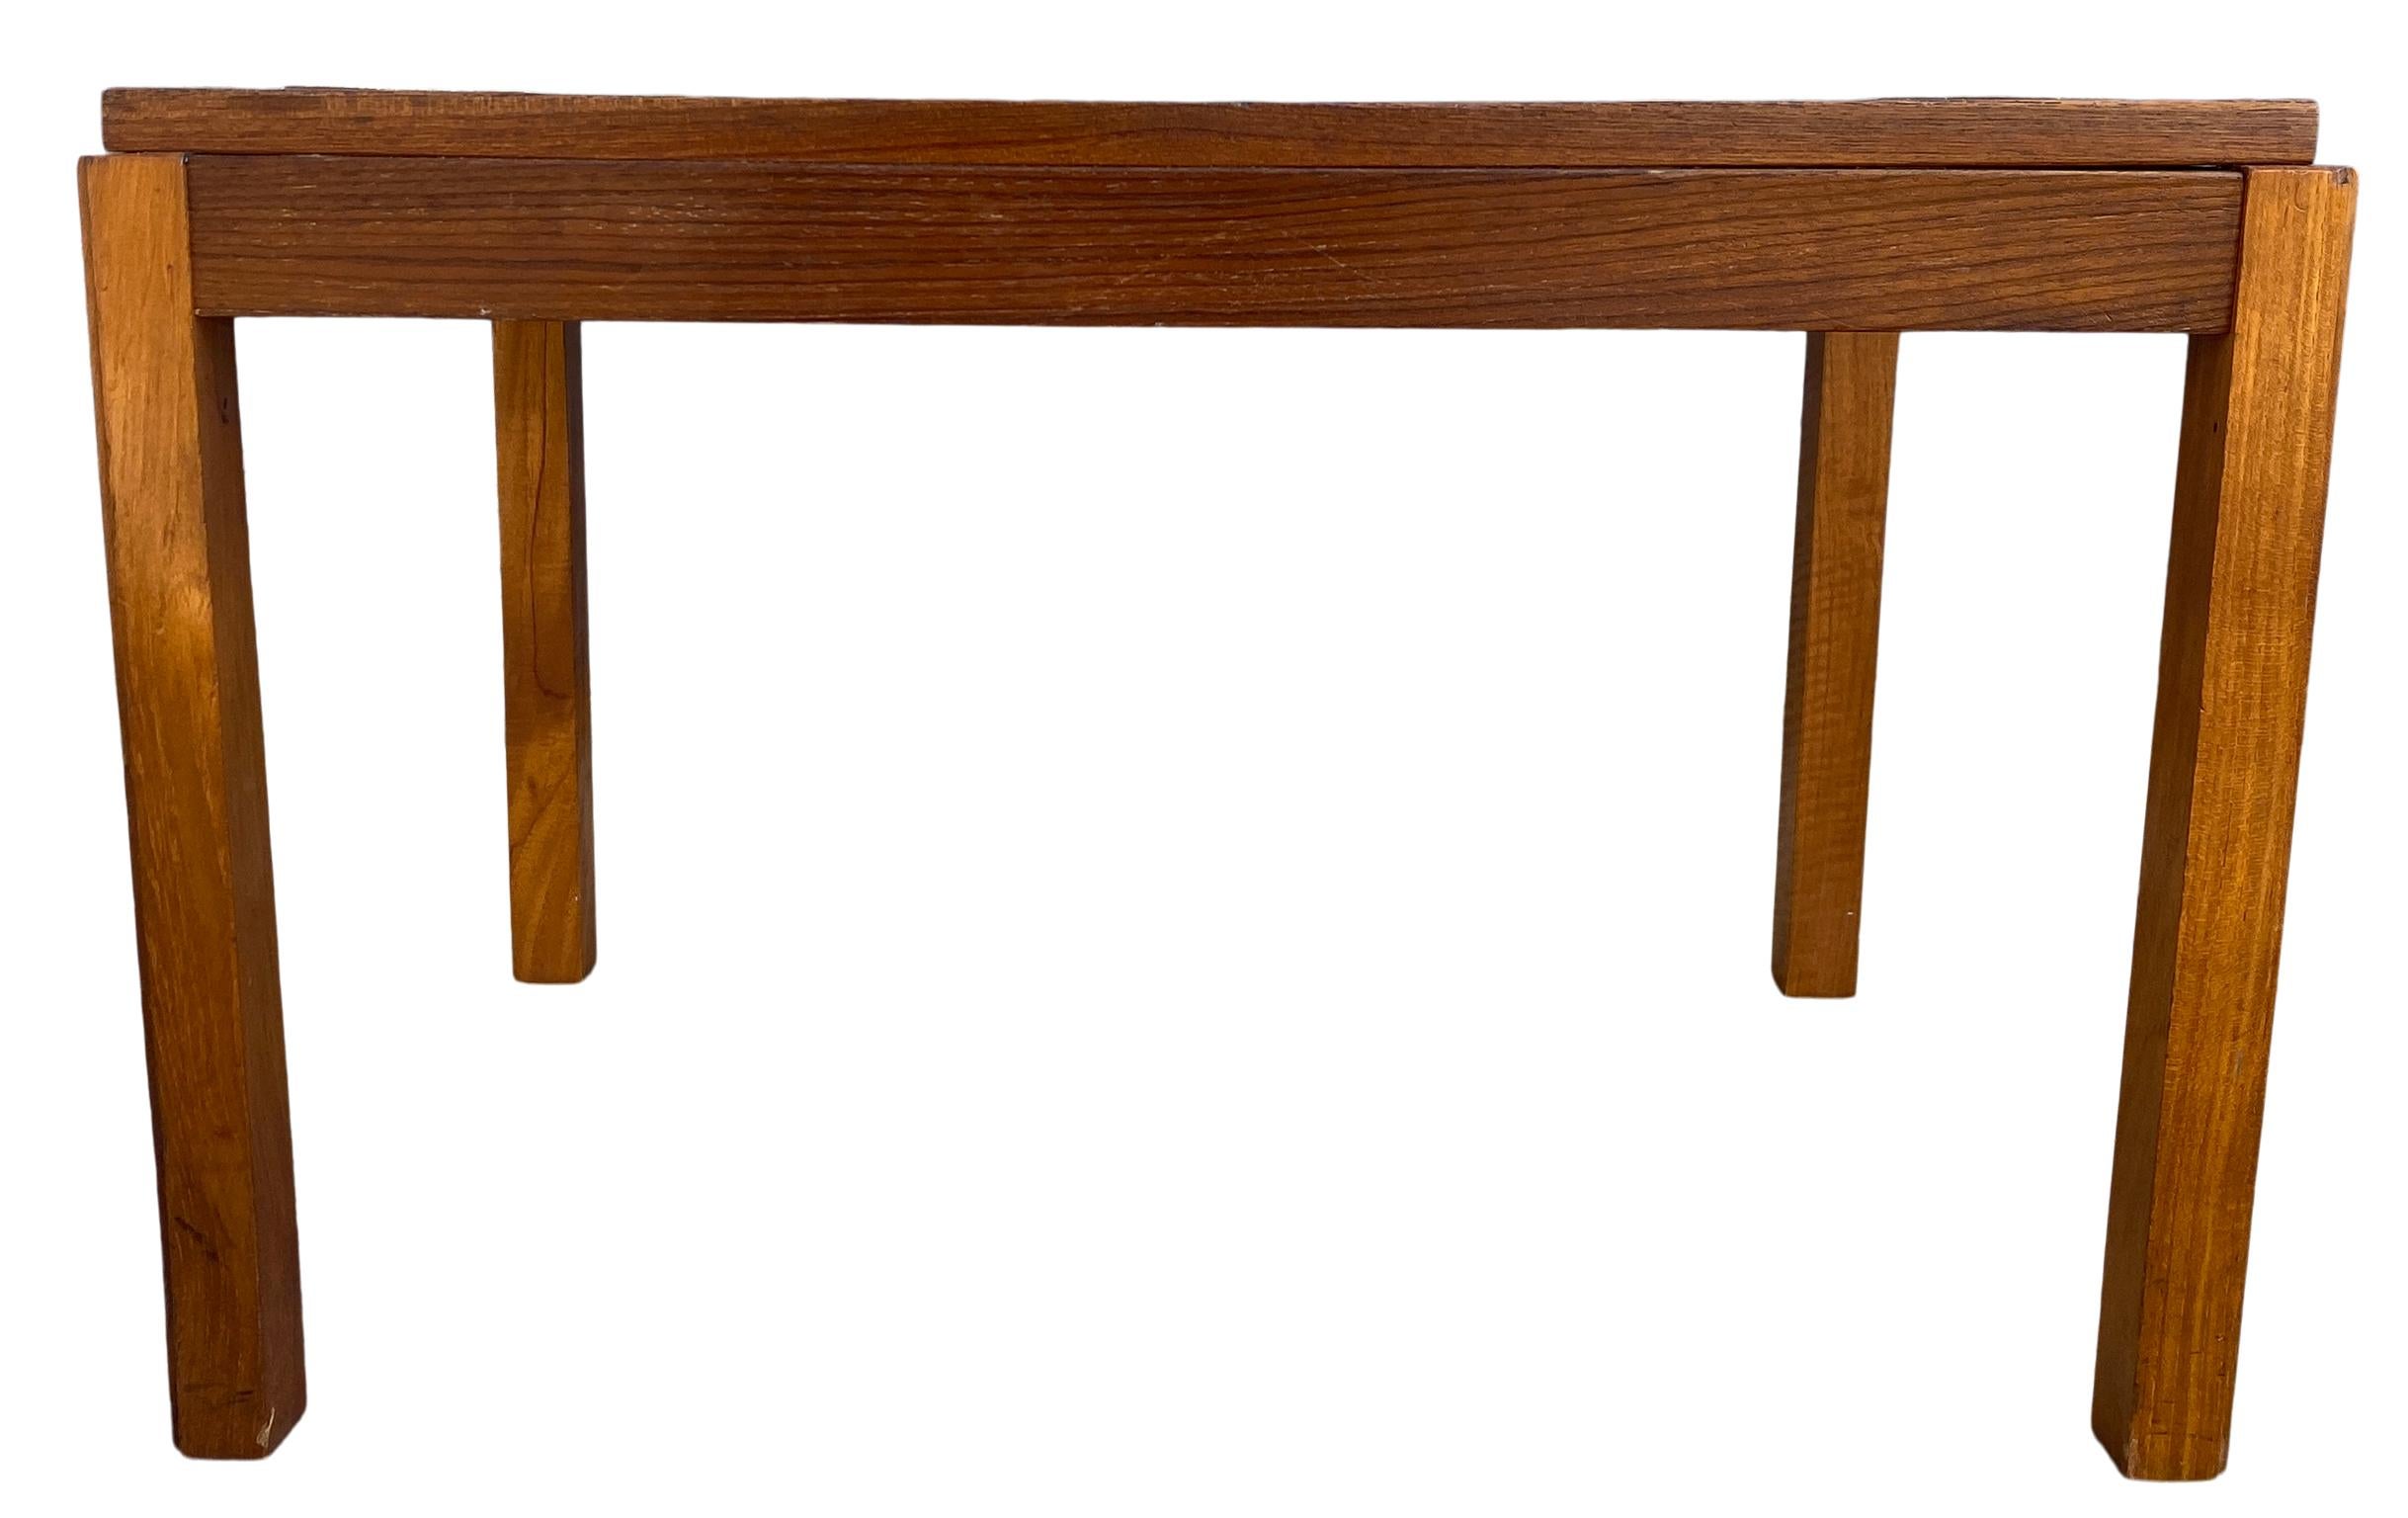 Midcentury Danish modern teak ceramic tile coffee table bench. Beautiful design and shape. Has beautiful ceramic tiles mounted in the top of the coffee table. Solid hardwood construction. Great vintage condition - very solid and sturdy.